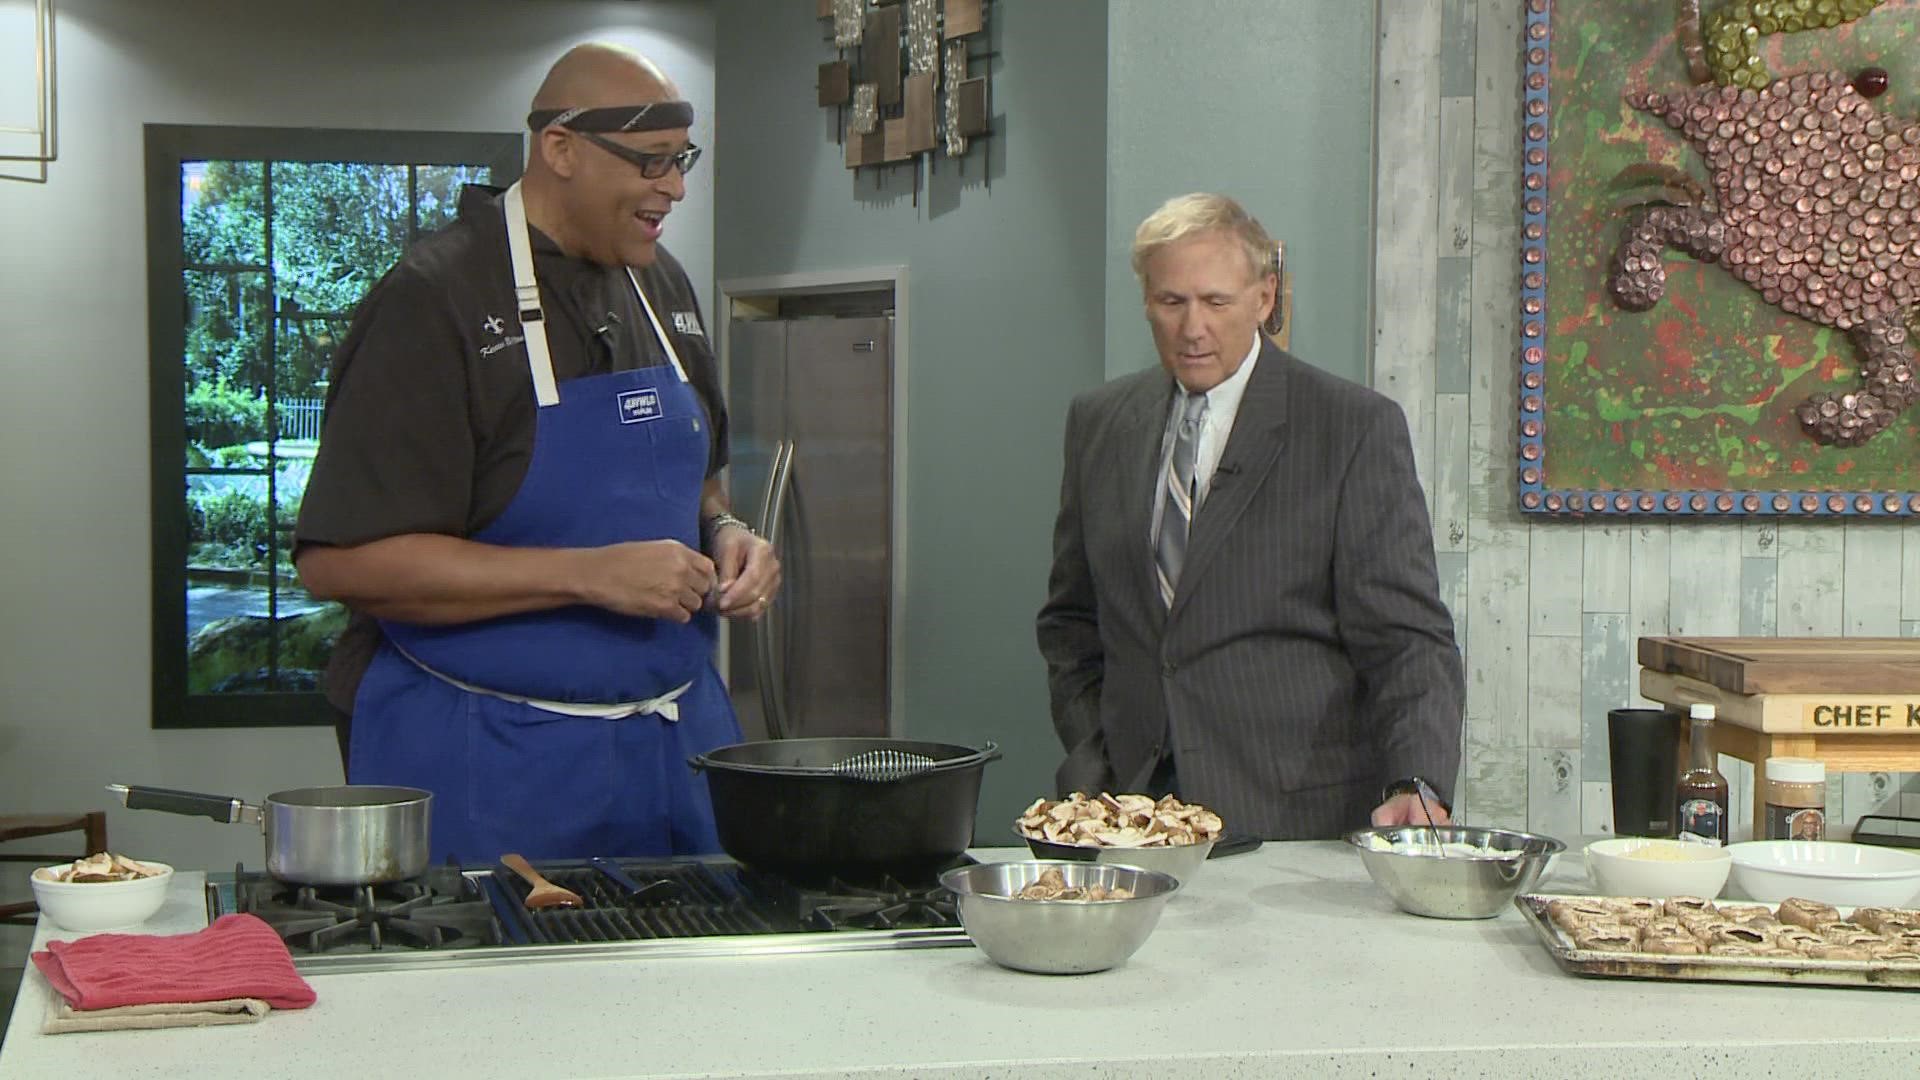 Chef Kevin is cooking up stuffed mushrooms in the WWLTV kitchen.